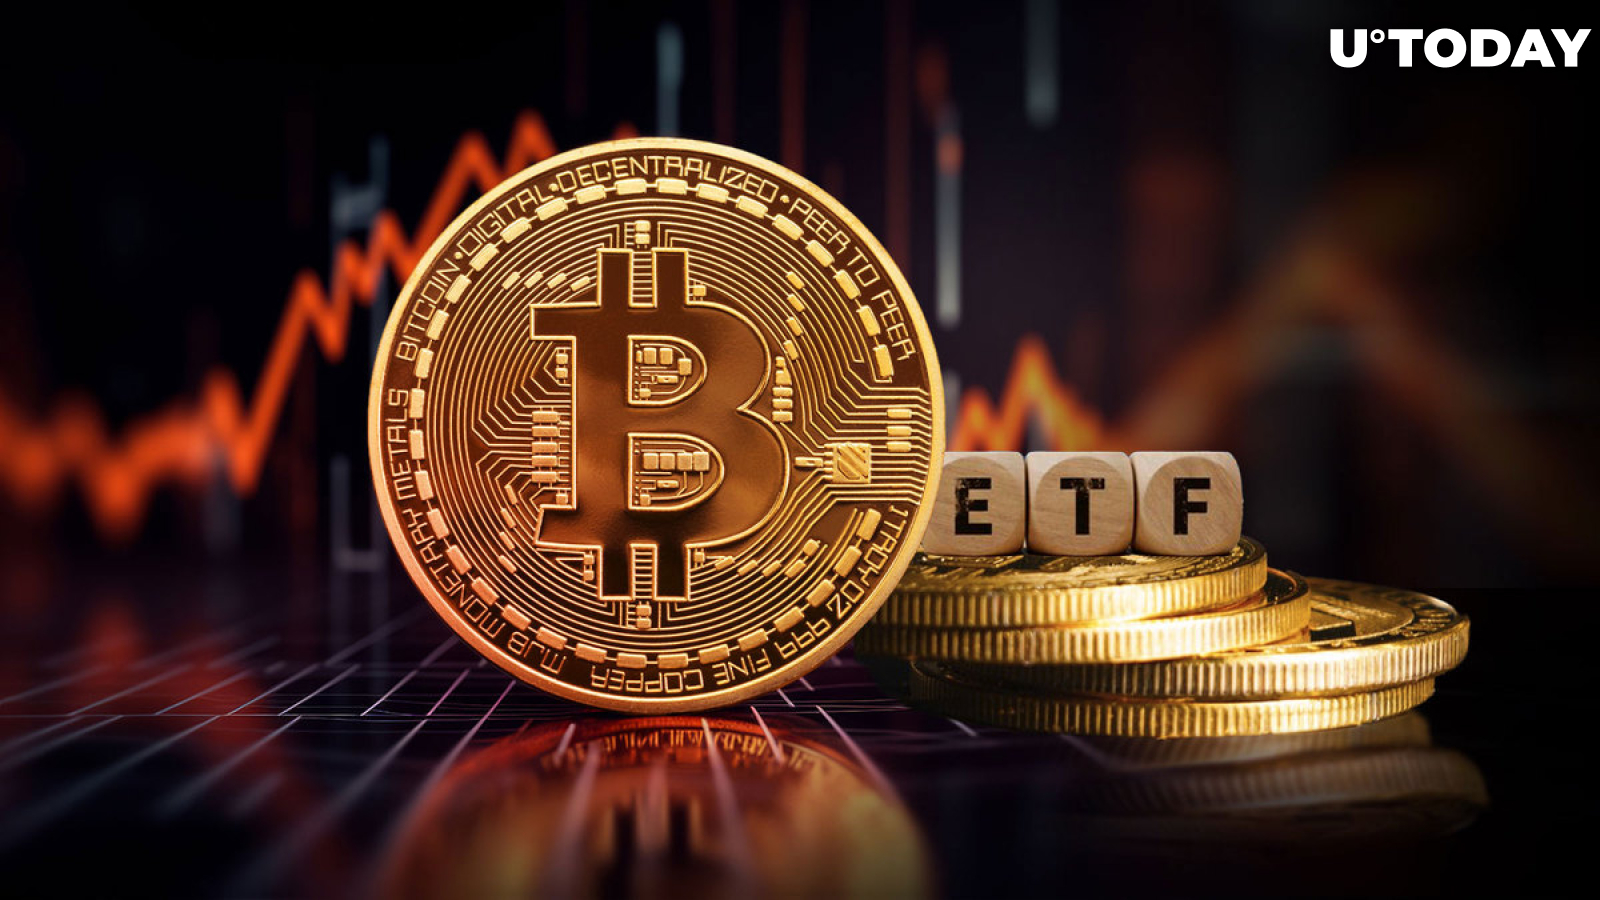 Is Bitcoin in Trouble? ETF Holder Number Plummets